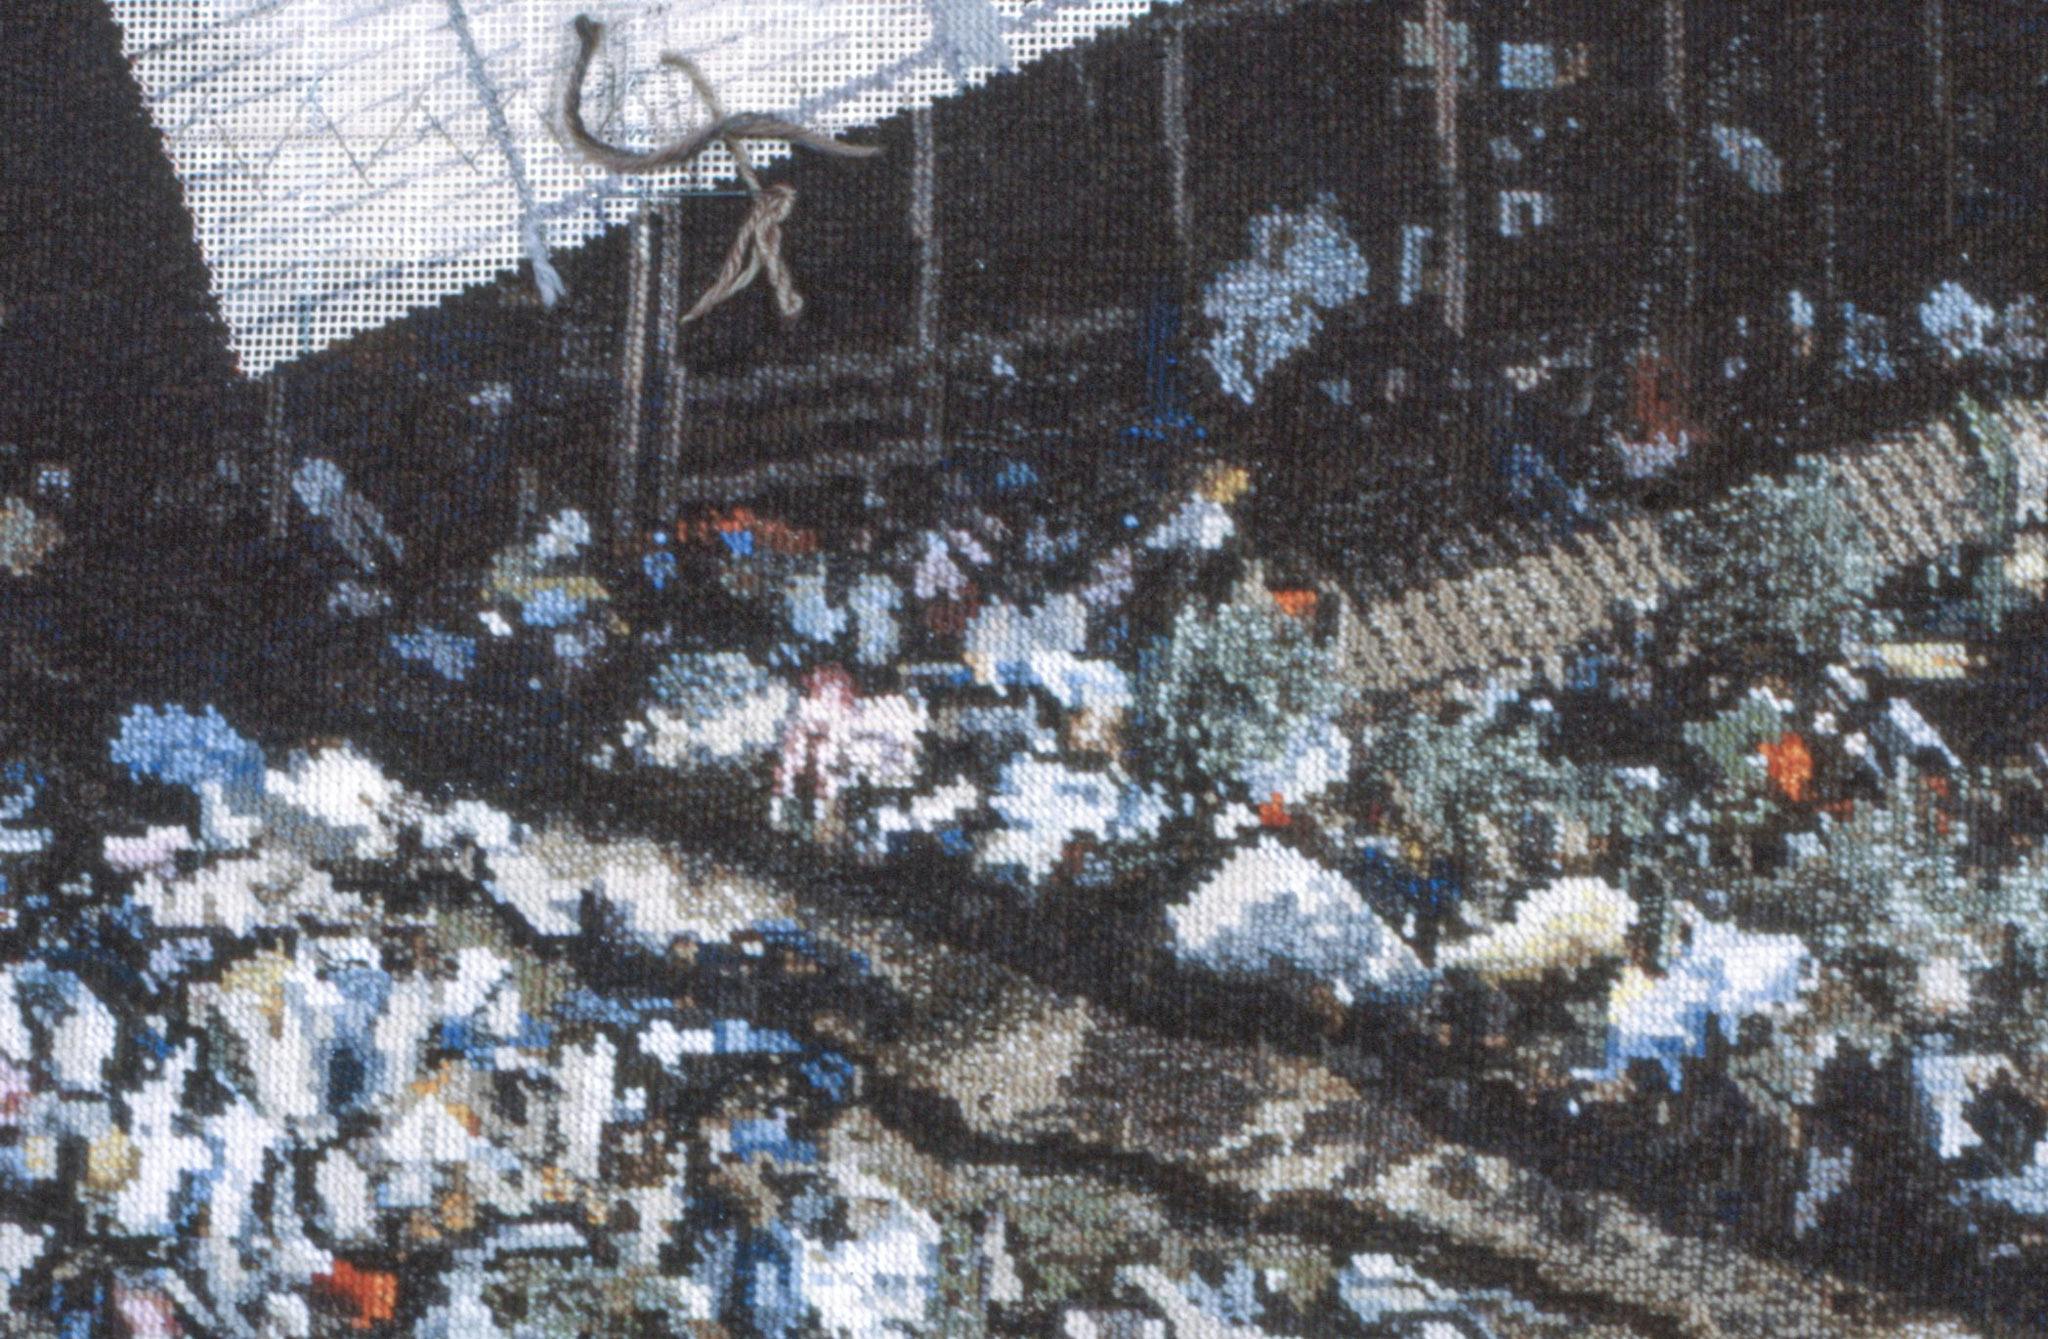 A closeup of an embroidered carpet, showing the Jonestown massacre. The detail shown includes bodies on the grass and under the shade of the large building shown. 